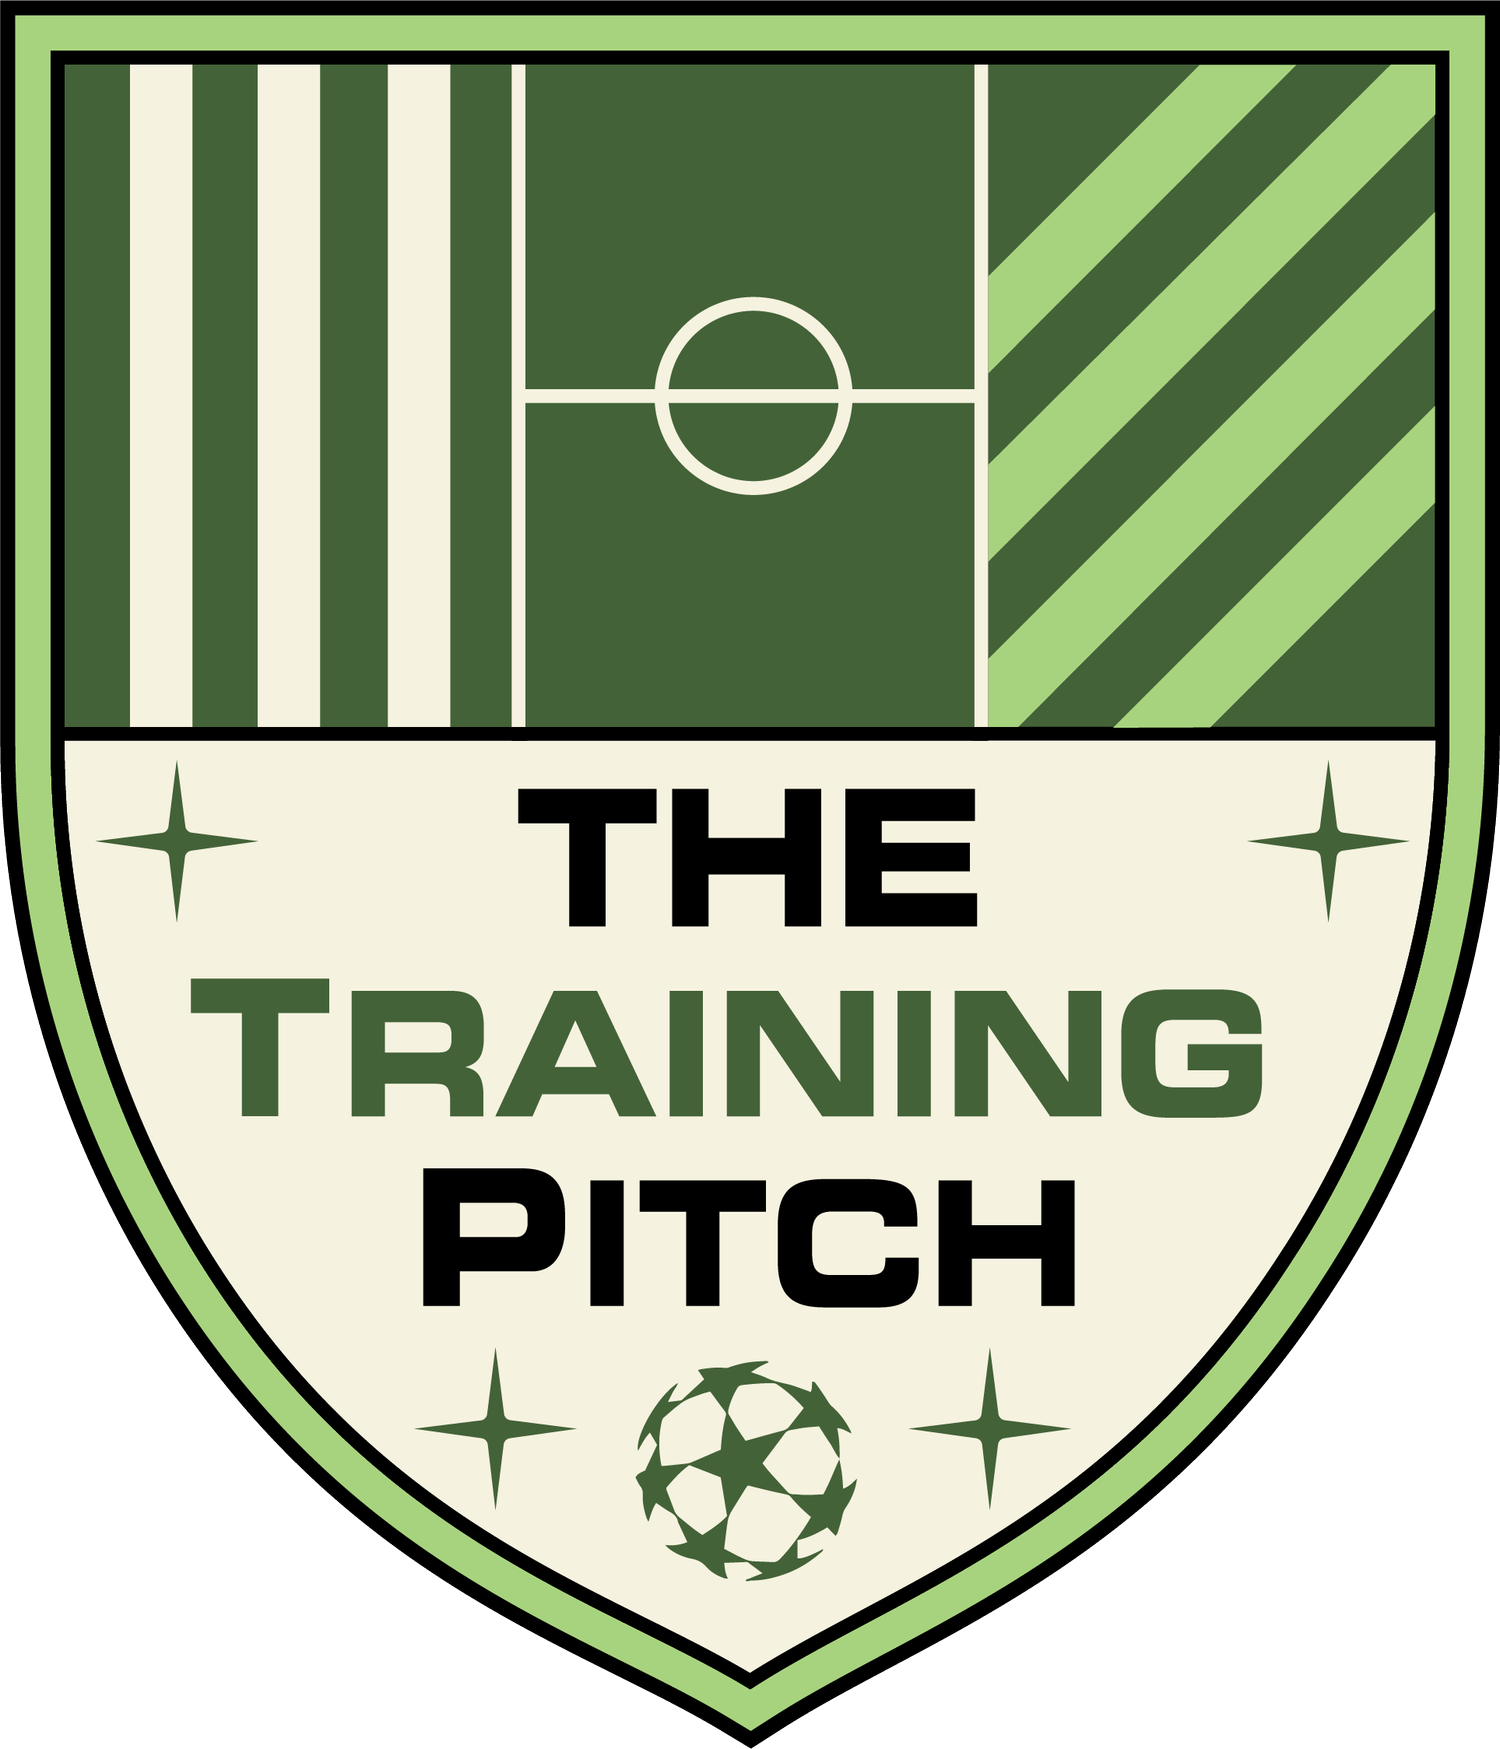 The Training Pitch